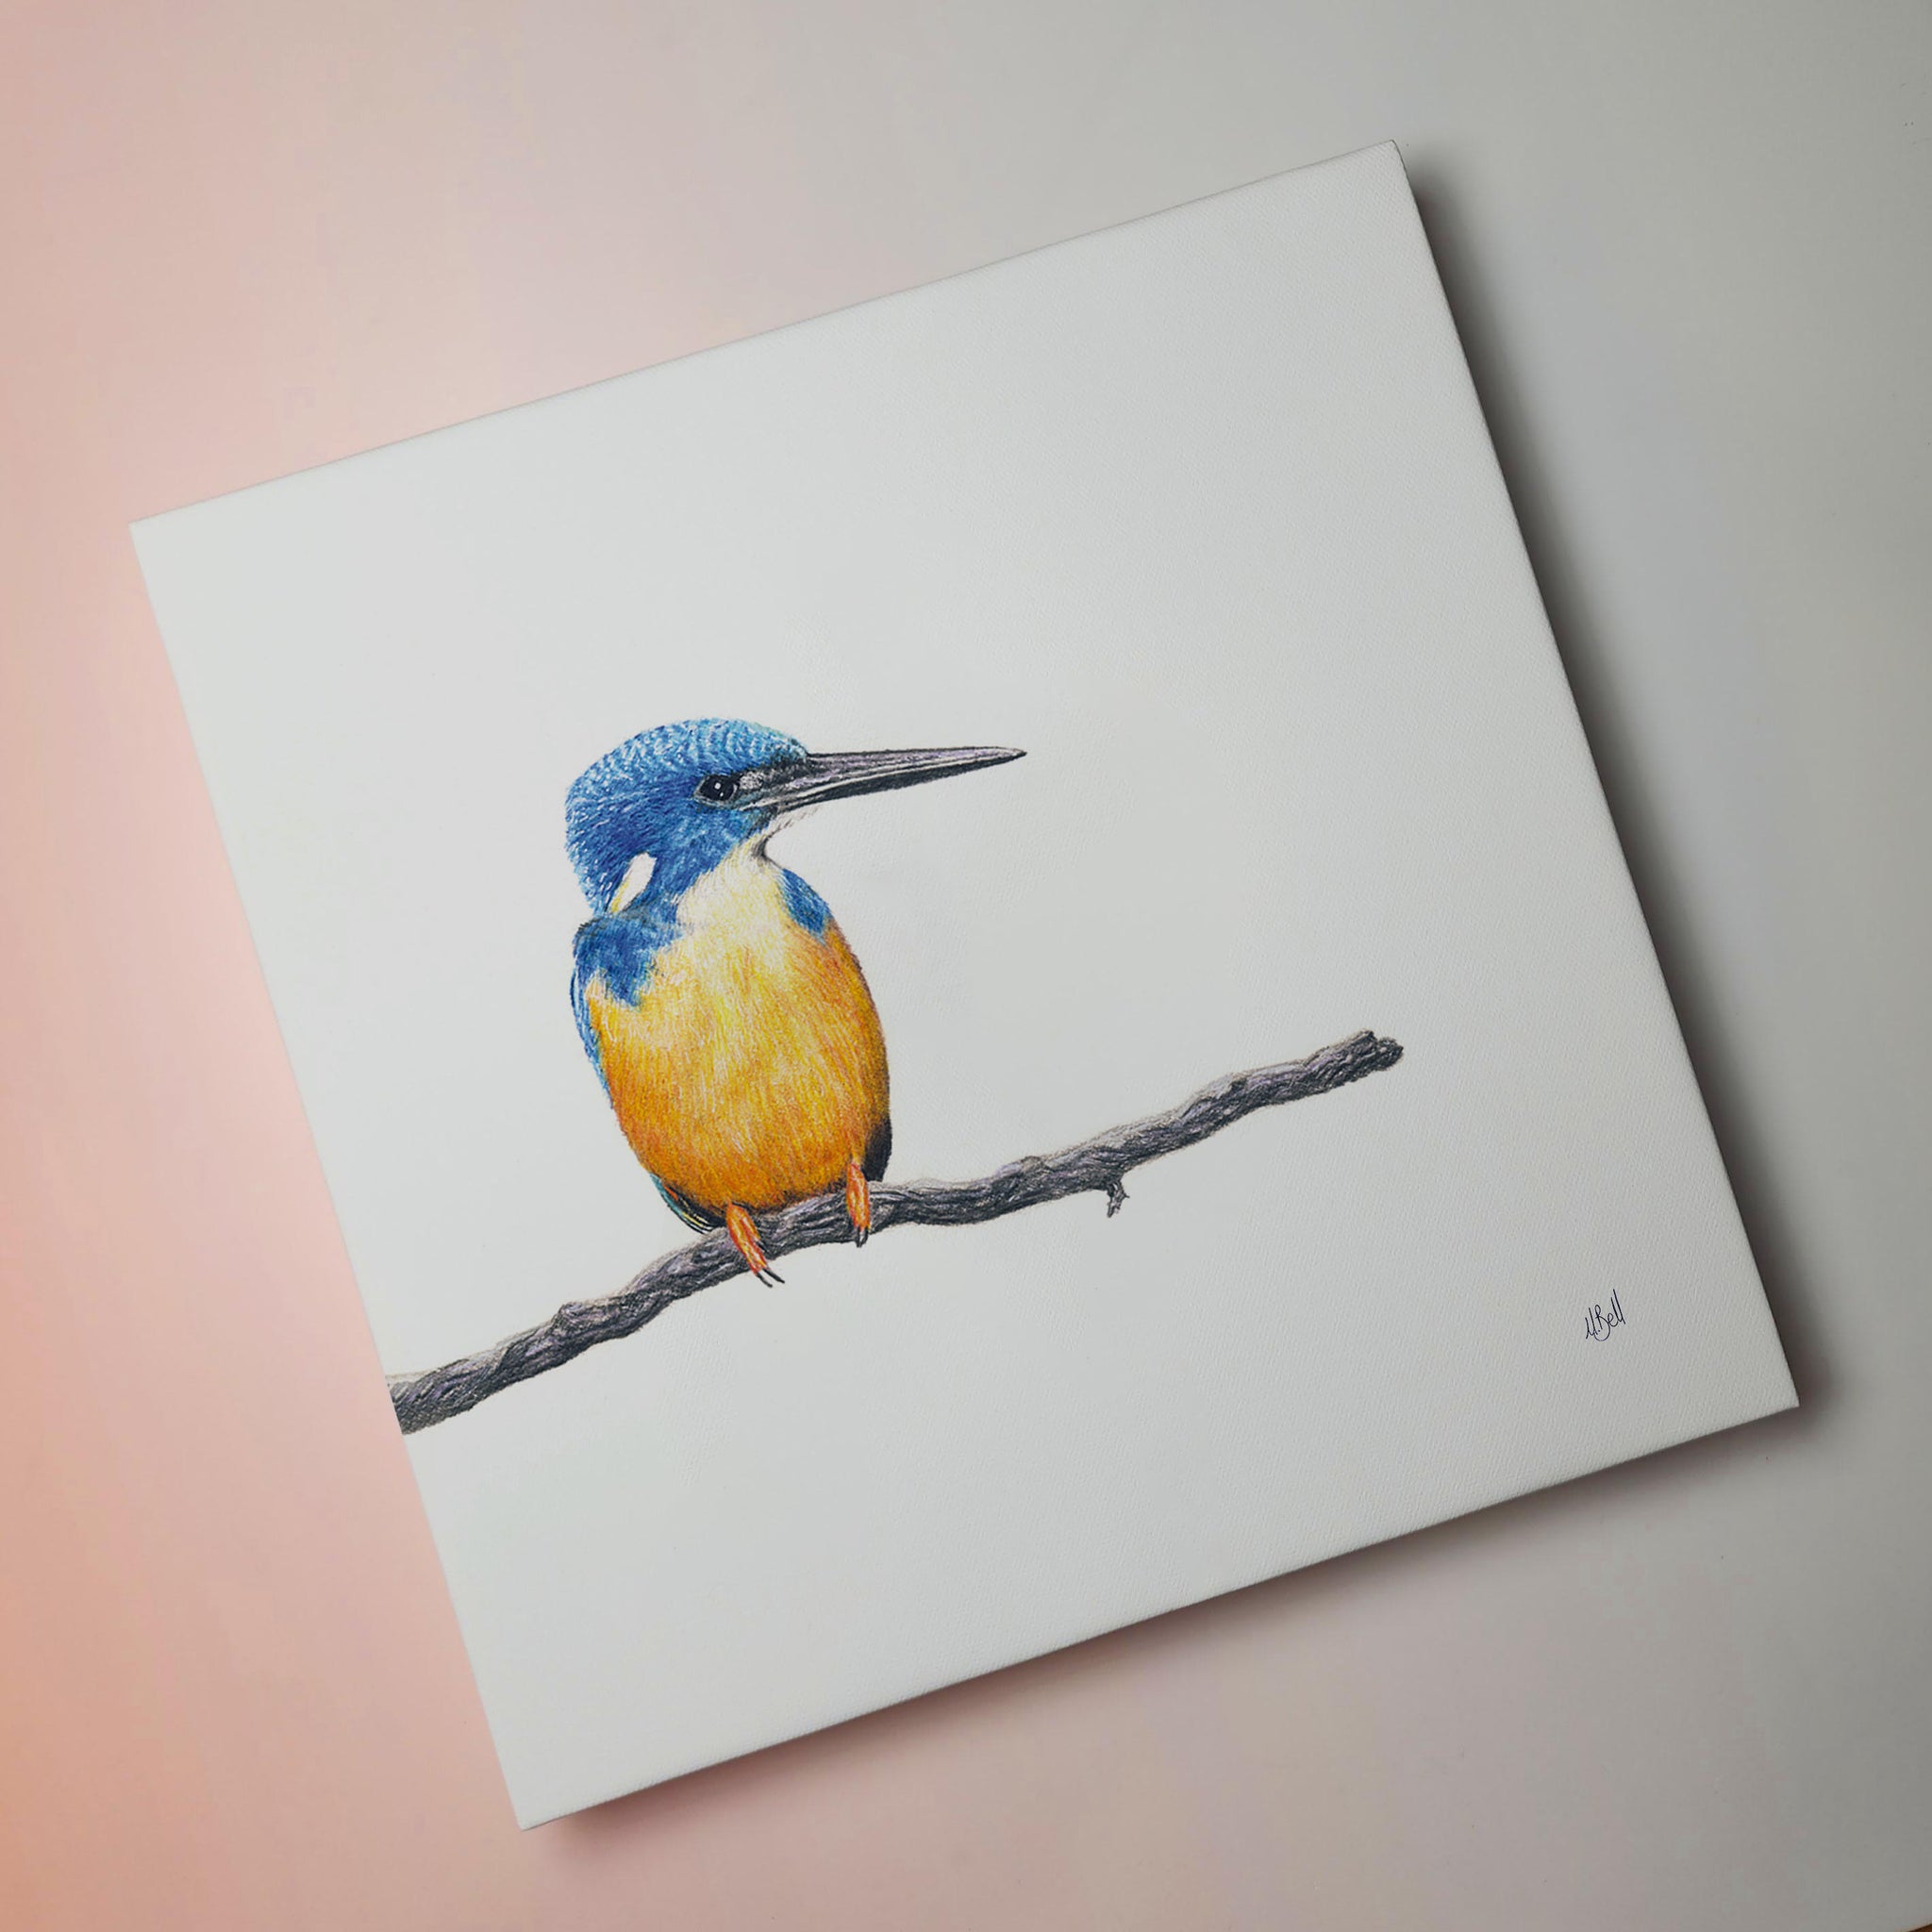 Half Collared Kingfisher bird artwork on stretched canvas